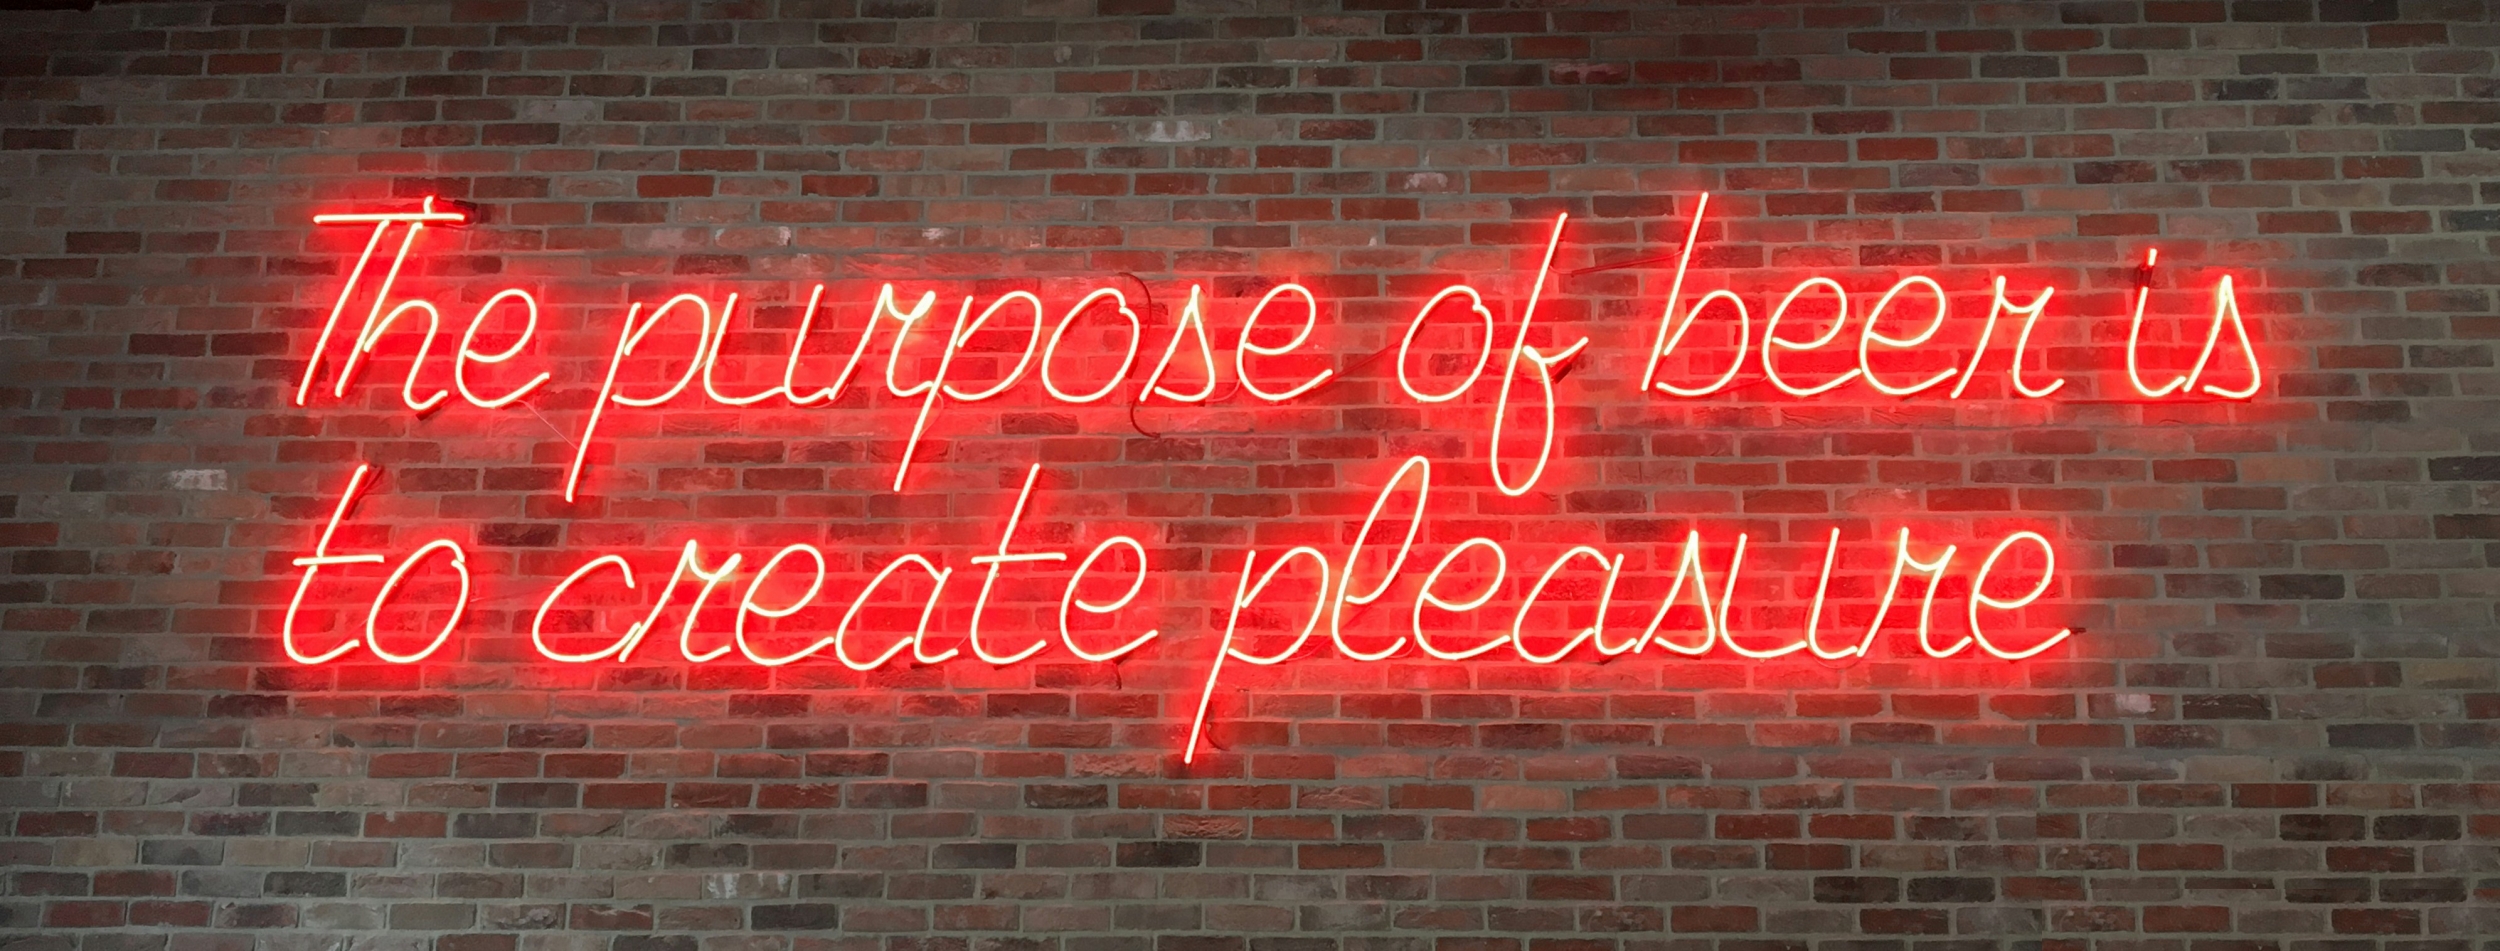 Neon sign that reads "The purpose of beer is to create pleasure"